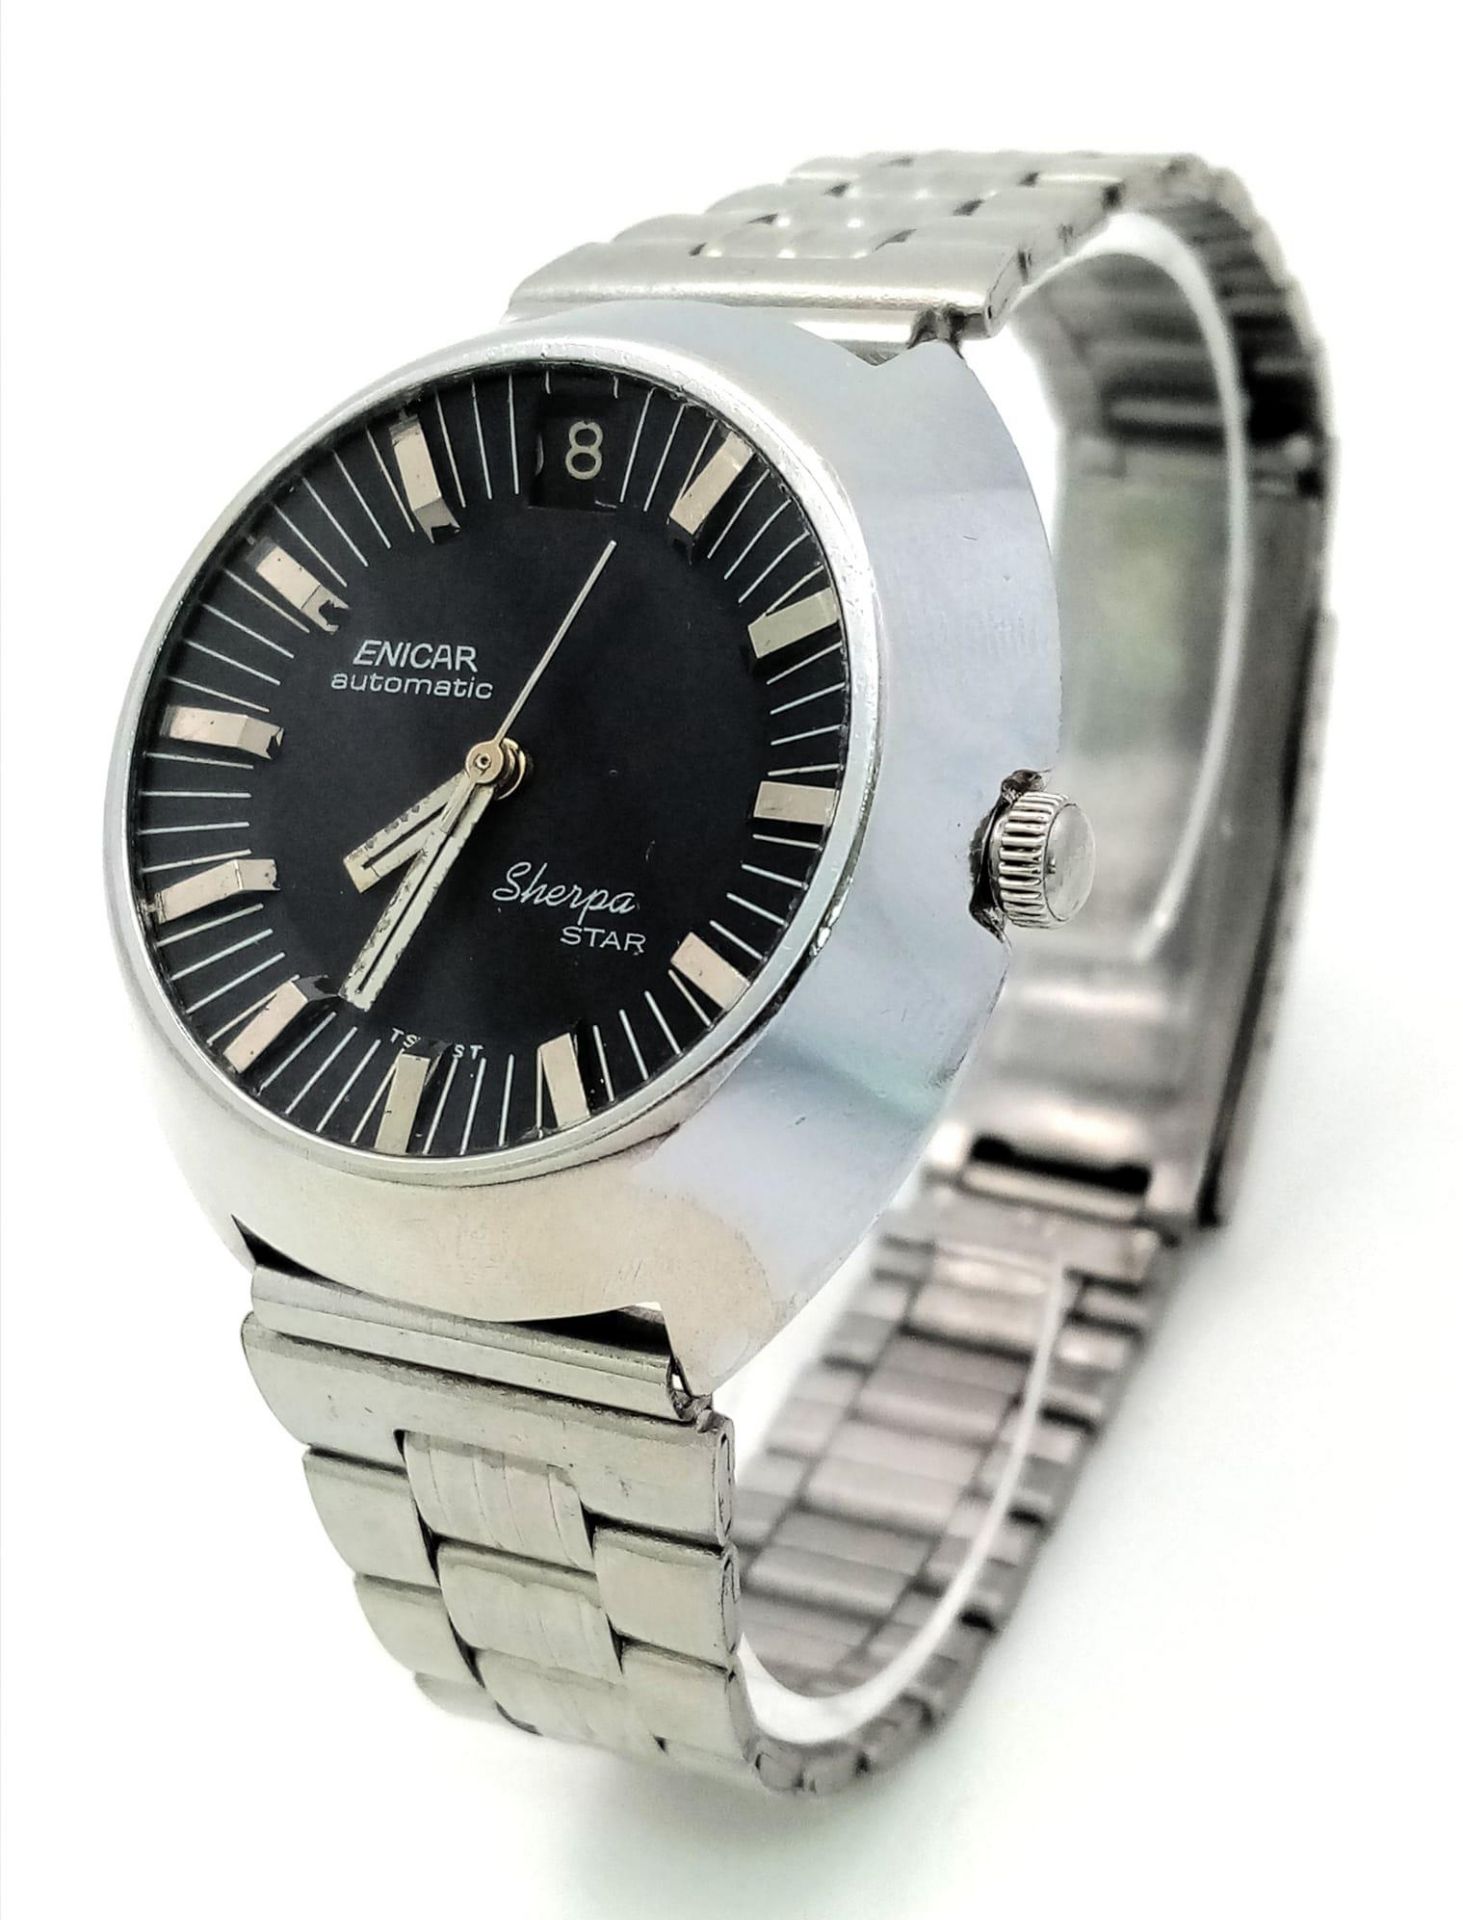 A Very Rare Enicar Sherpa Automatic Gents Watch. Stainless steel strap and case - 38mm. Black dial